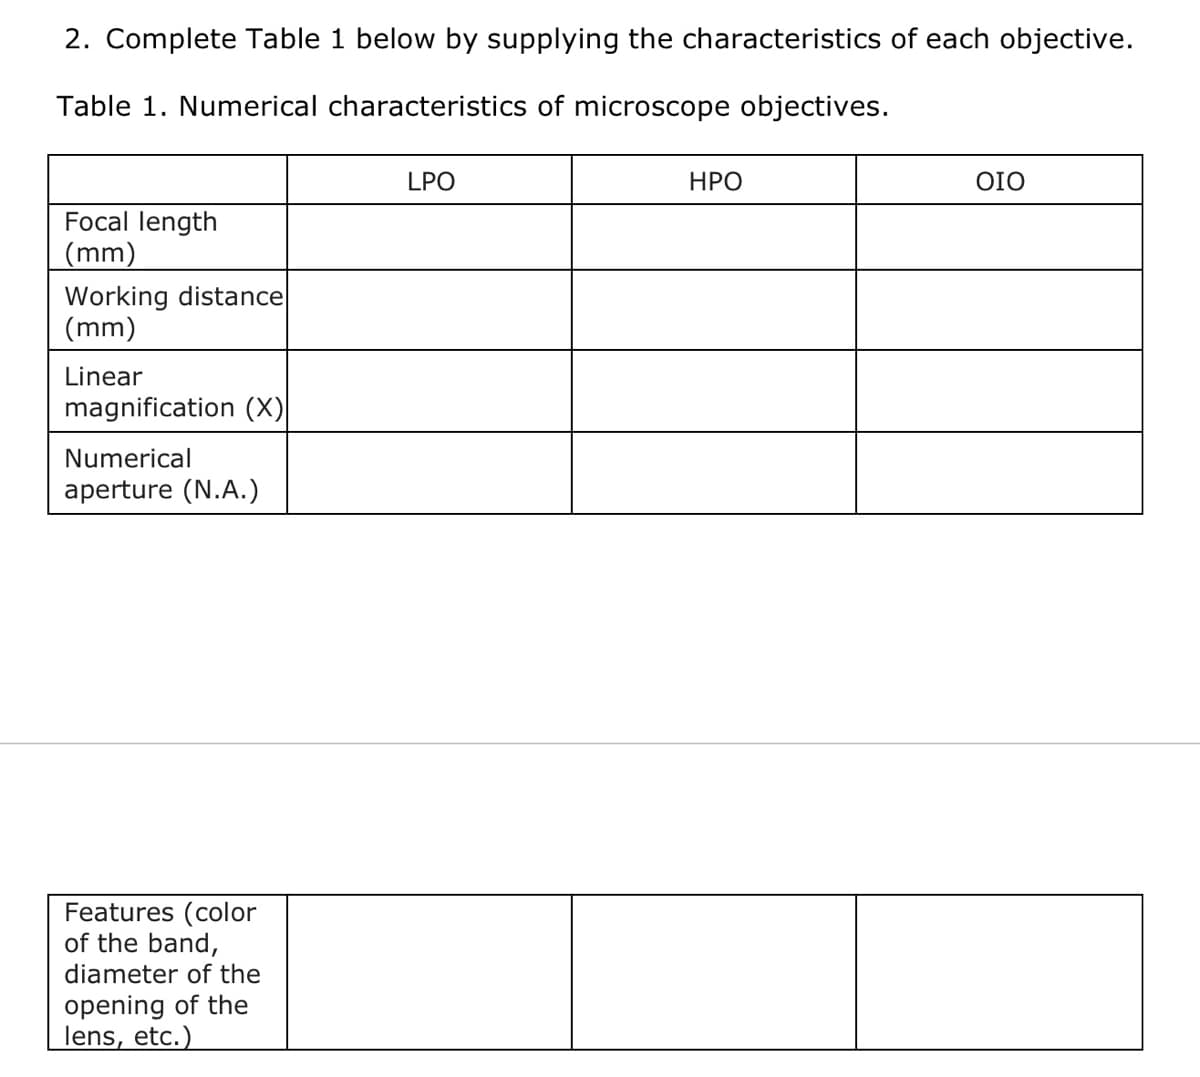 2. Complete Table 1 below by supplying the characteristics of each objective.
Table 1. Numerical characteristics of microscope objectives.
Focal length
(mm)
Working distance
(mm)
Linear
magnification (X)
Numerical
aperture (N.A.)
Features (color
of the band,
diameter of the
opening of the
lens, etc.)
LPO
HPO
ΟΙΟ